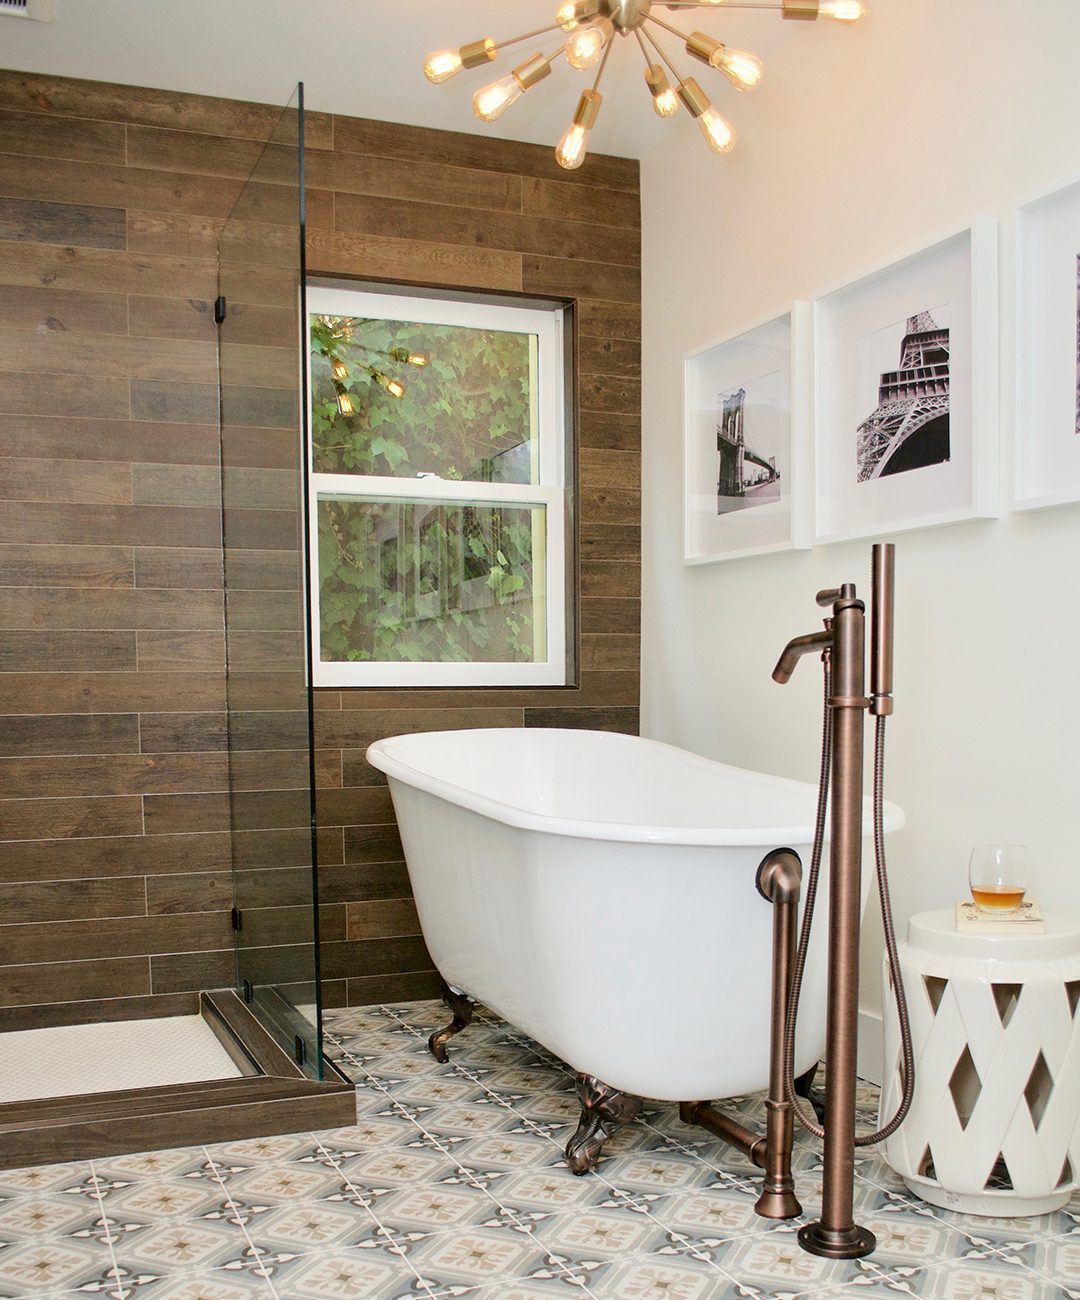 Replace-a-tub-for-a-shower-or-vice-versa-for-a-creative-bathroom-design-solutions